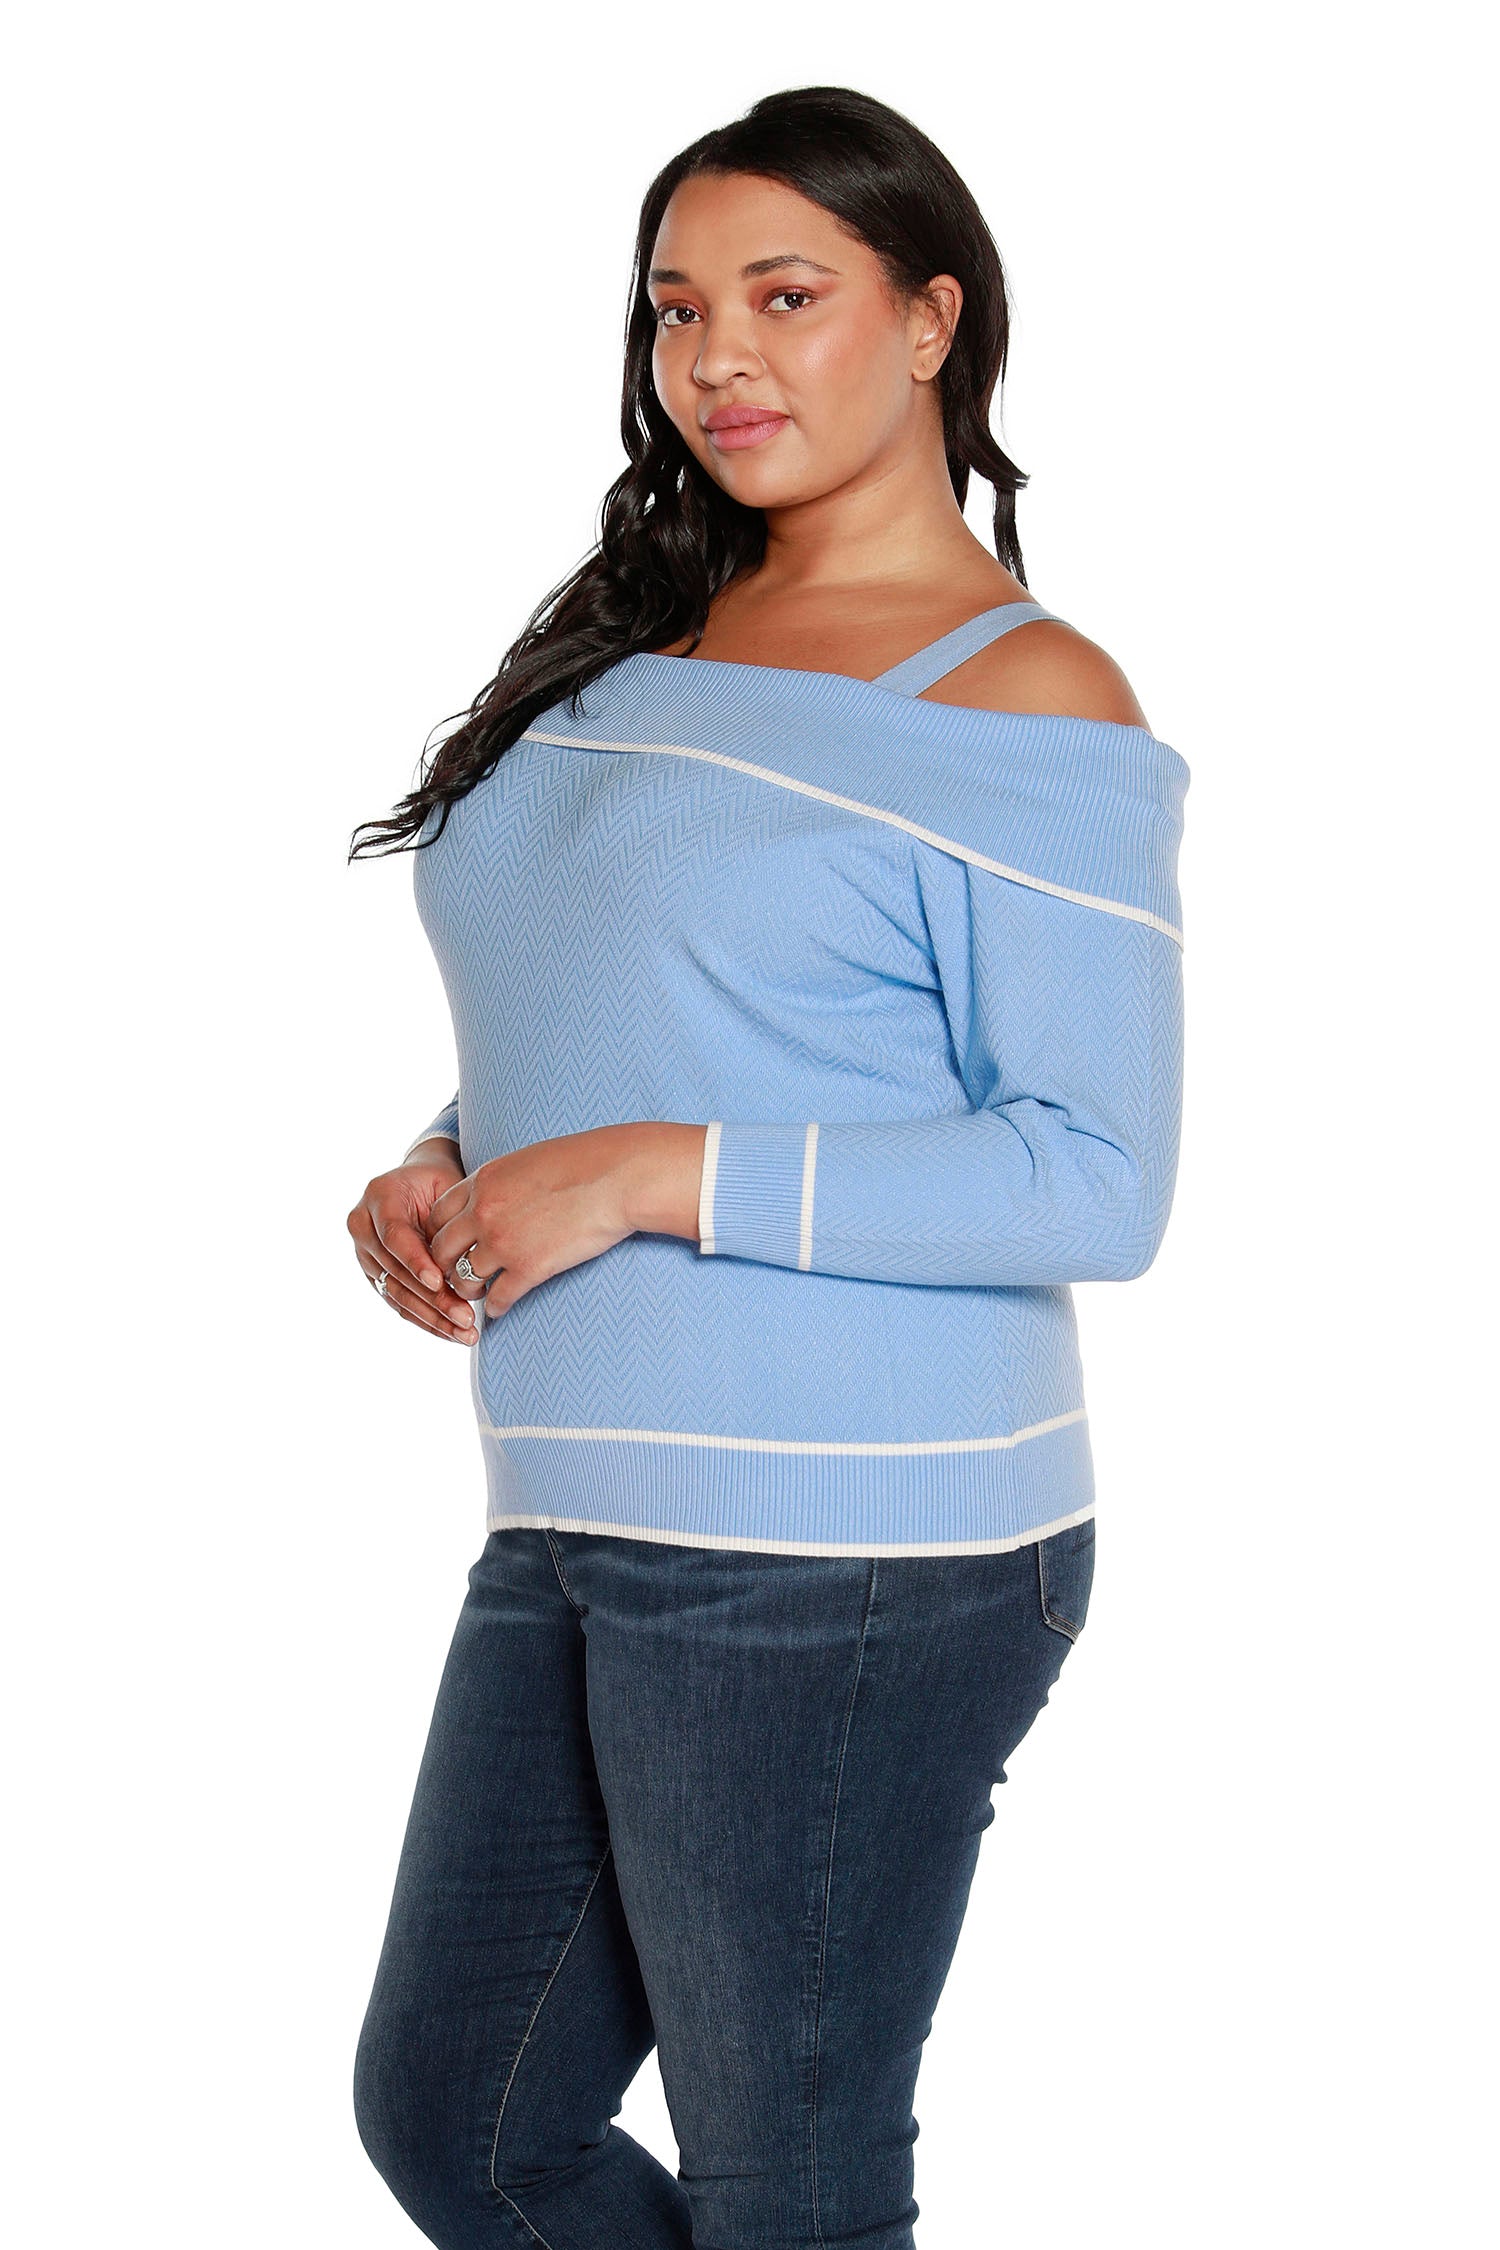 Women’s Slouchy Off the Shoulder Sweater with Fold Over Yoke | Curvy